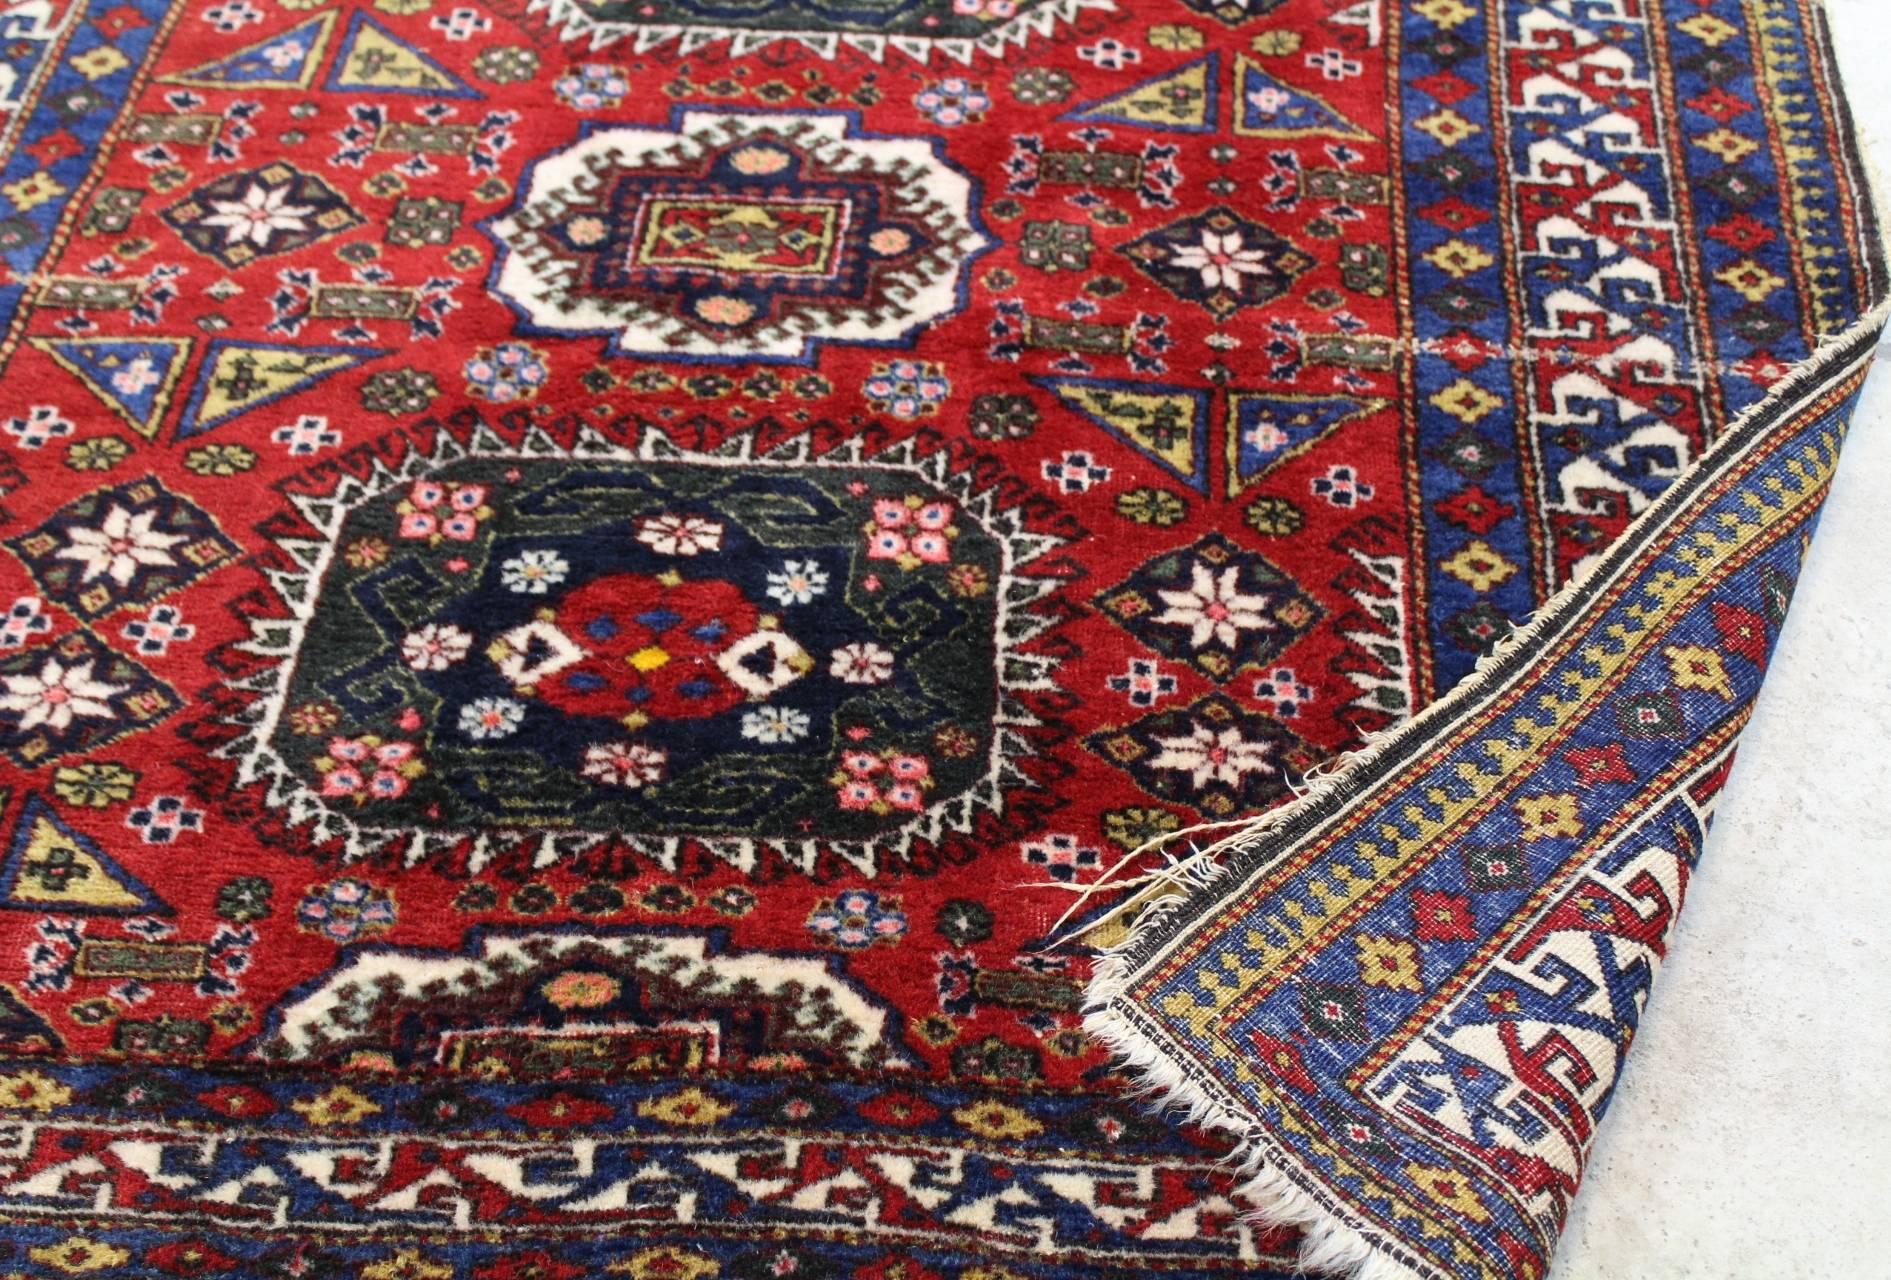 Anatolian rug from the first half of the 20th century in very good original condition.